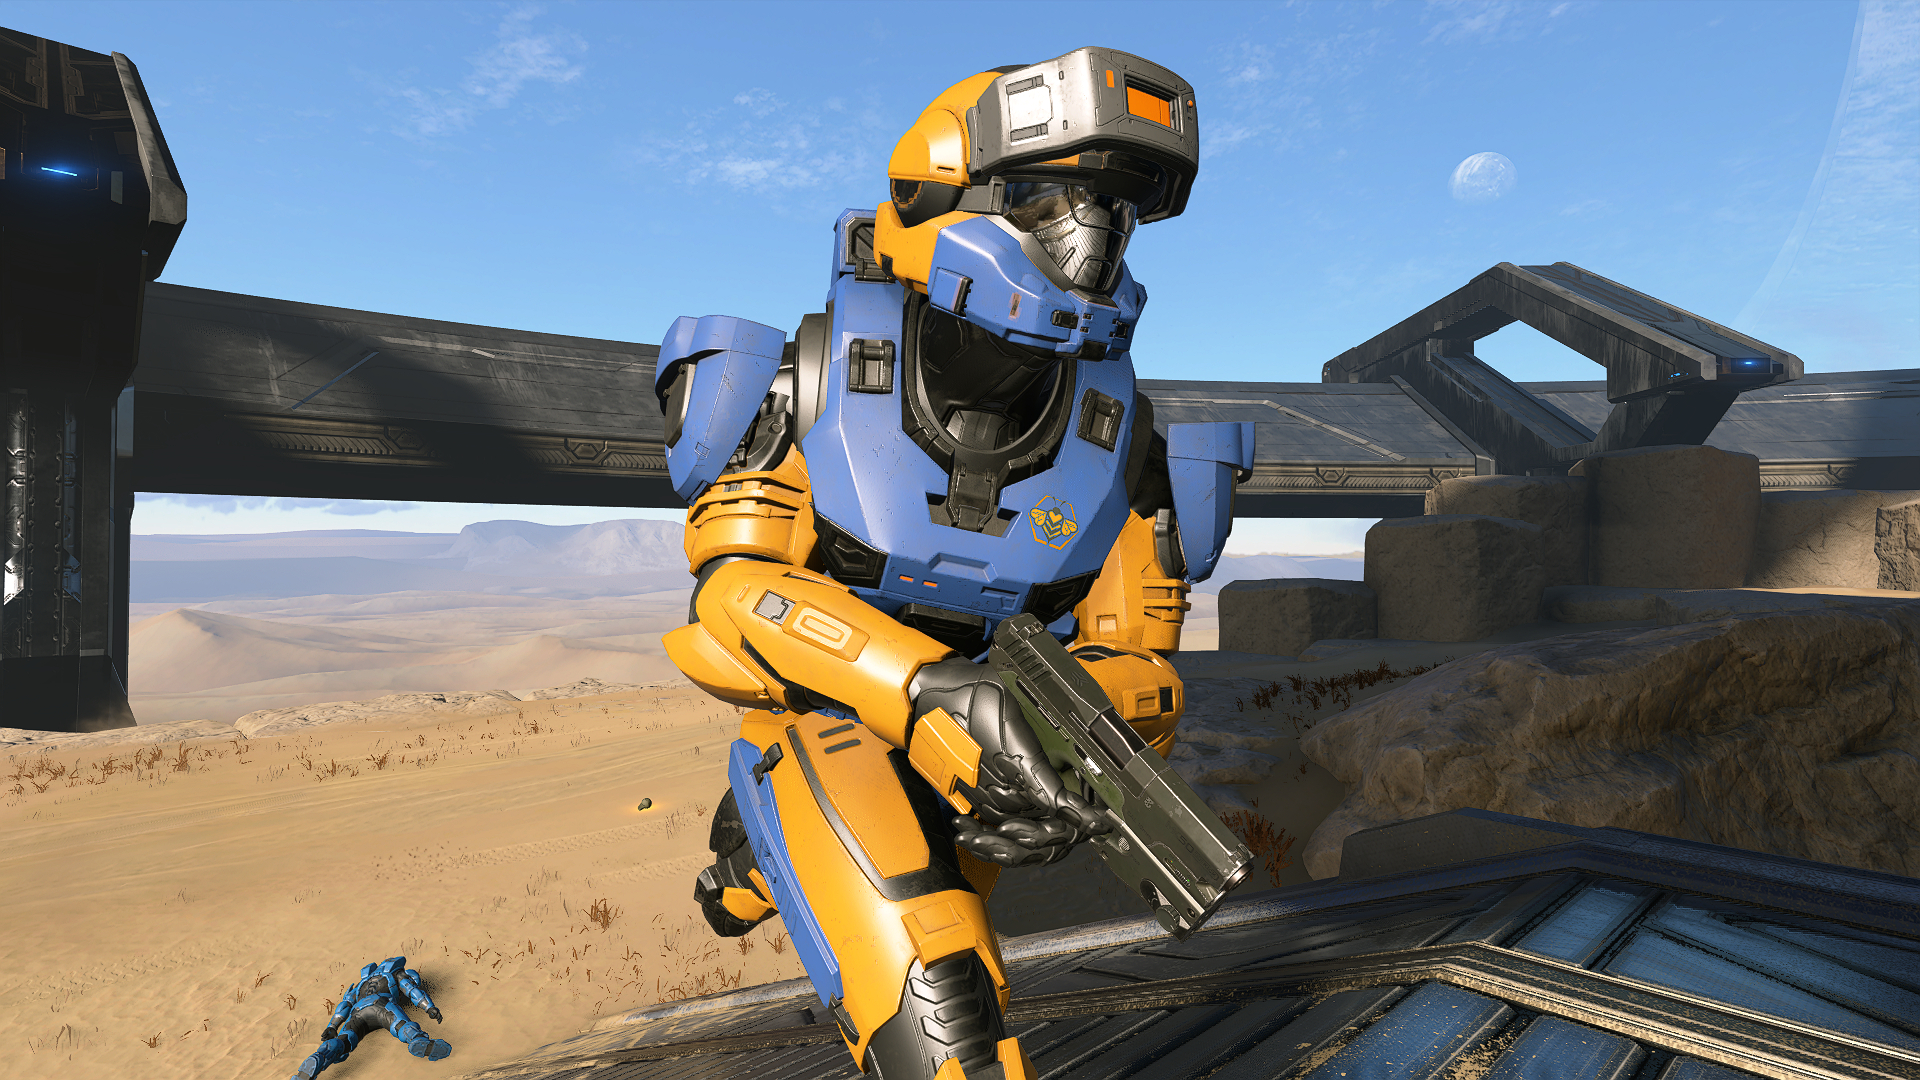 Halo Infinite multiplayer is free to download and play right now